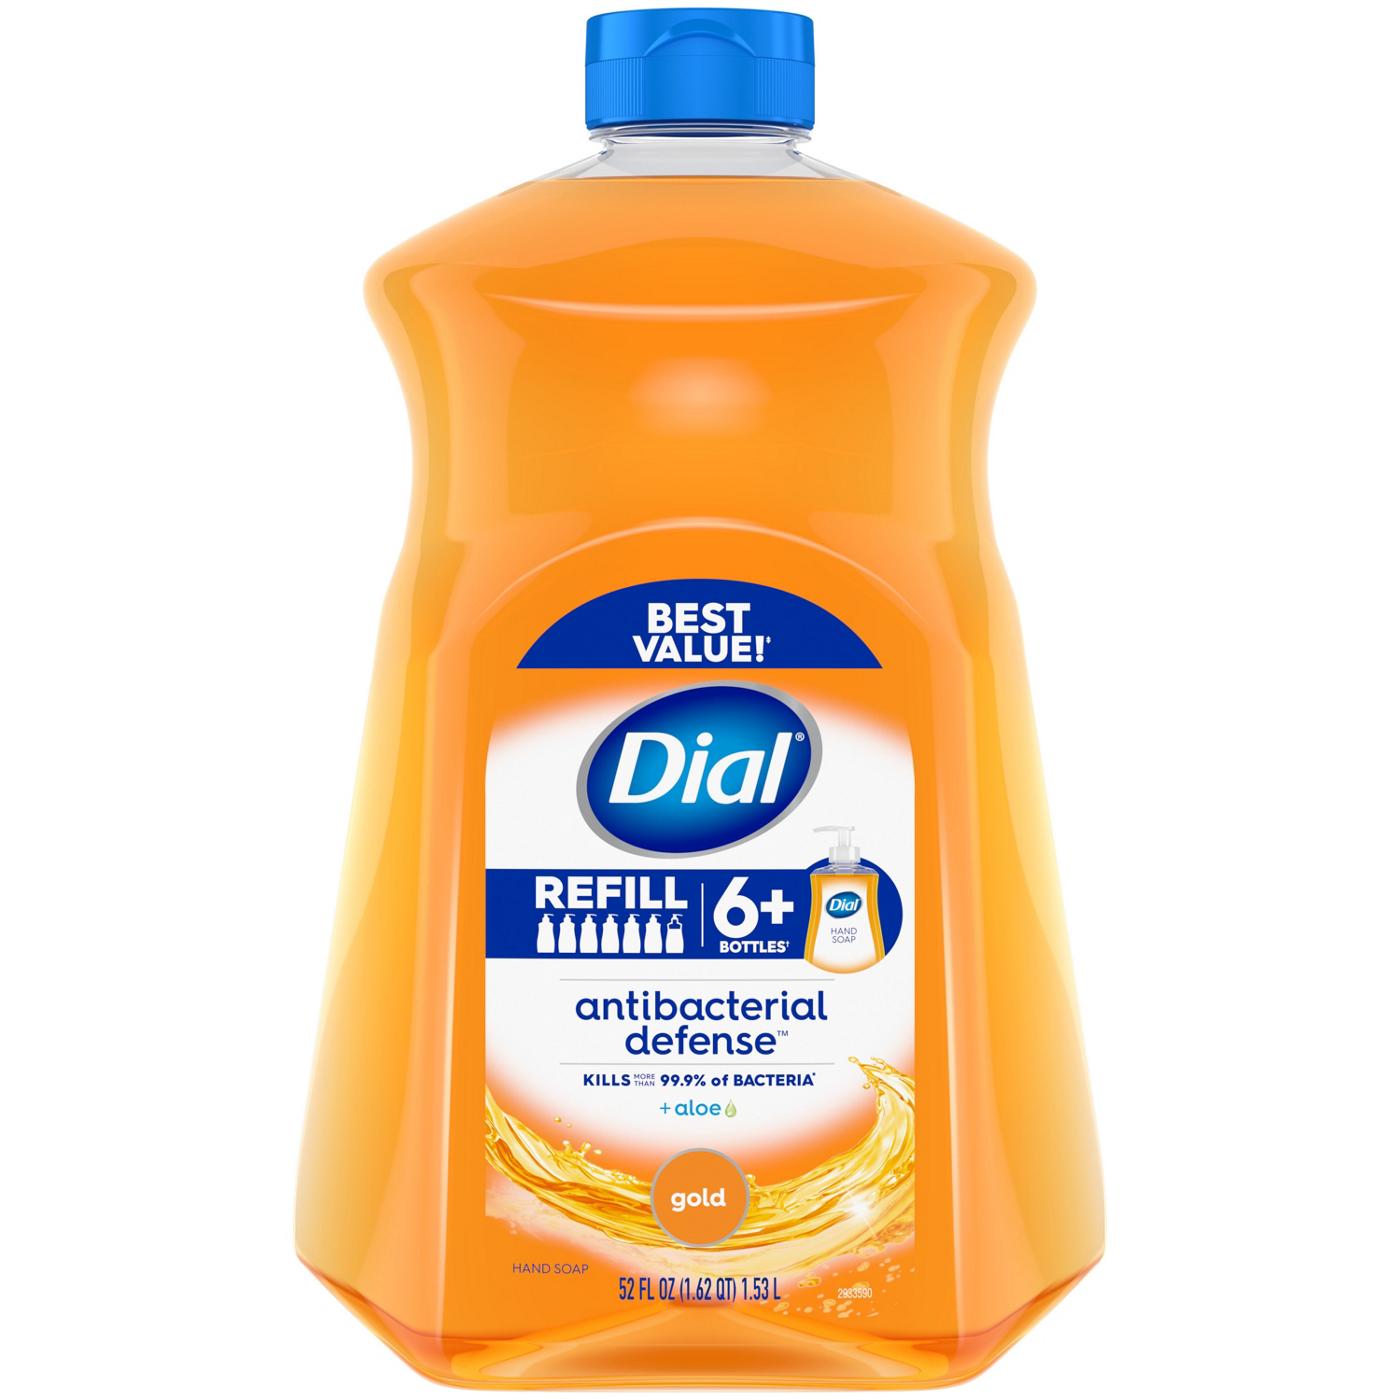 Dial Antibacterial Hand Soap Refill - Gold; image 1 of 3